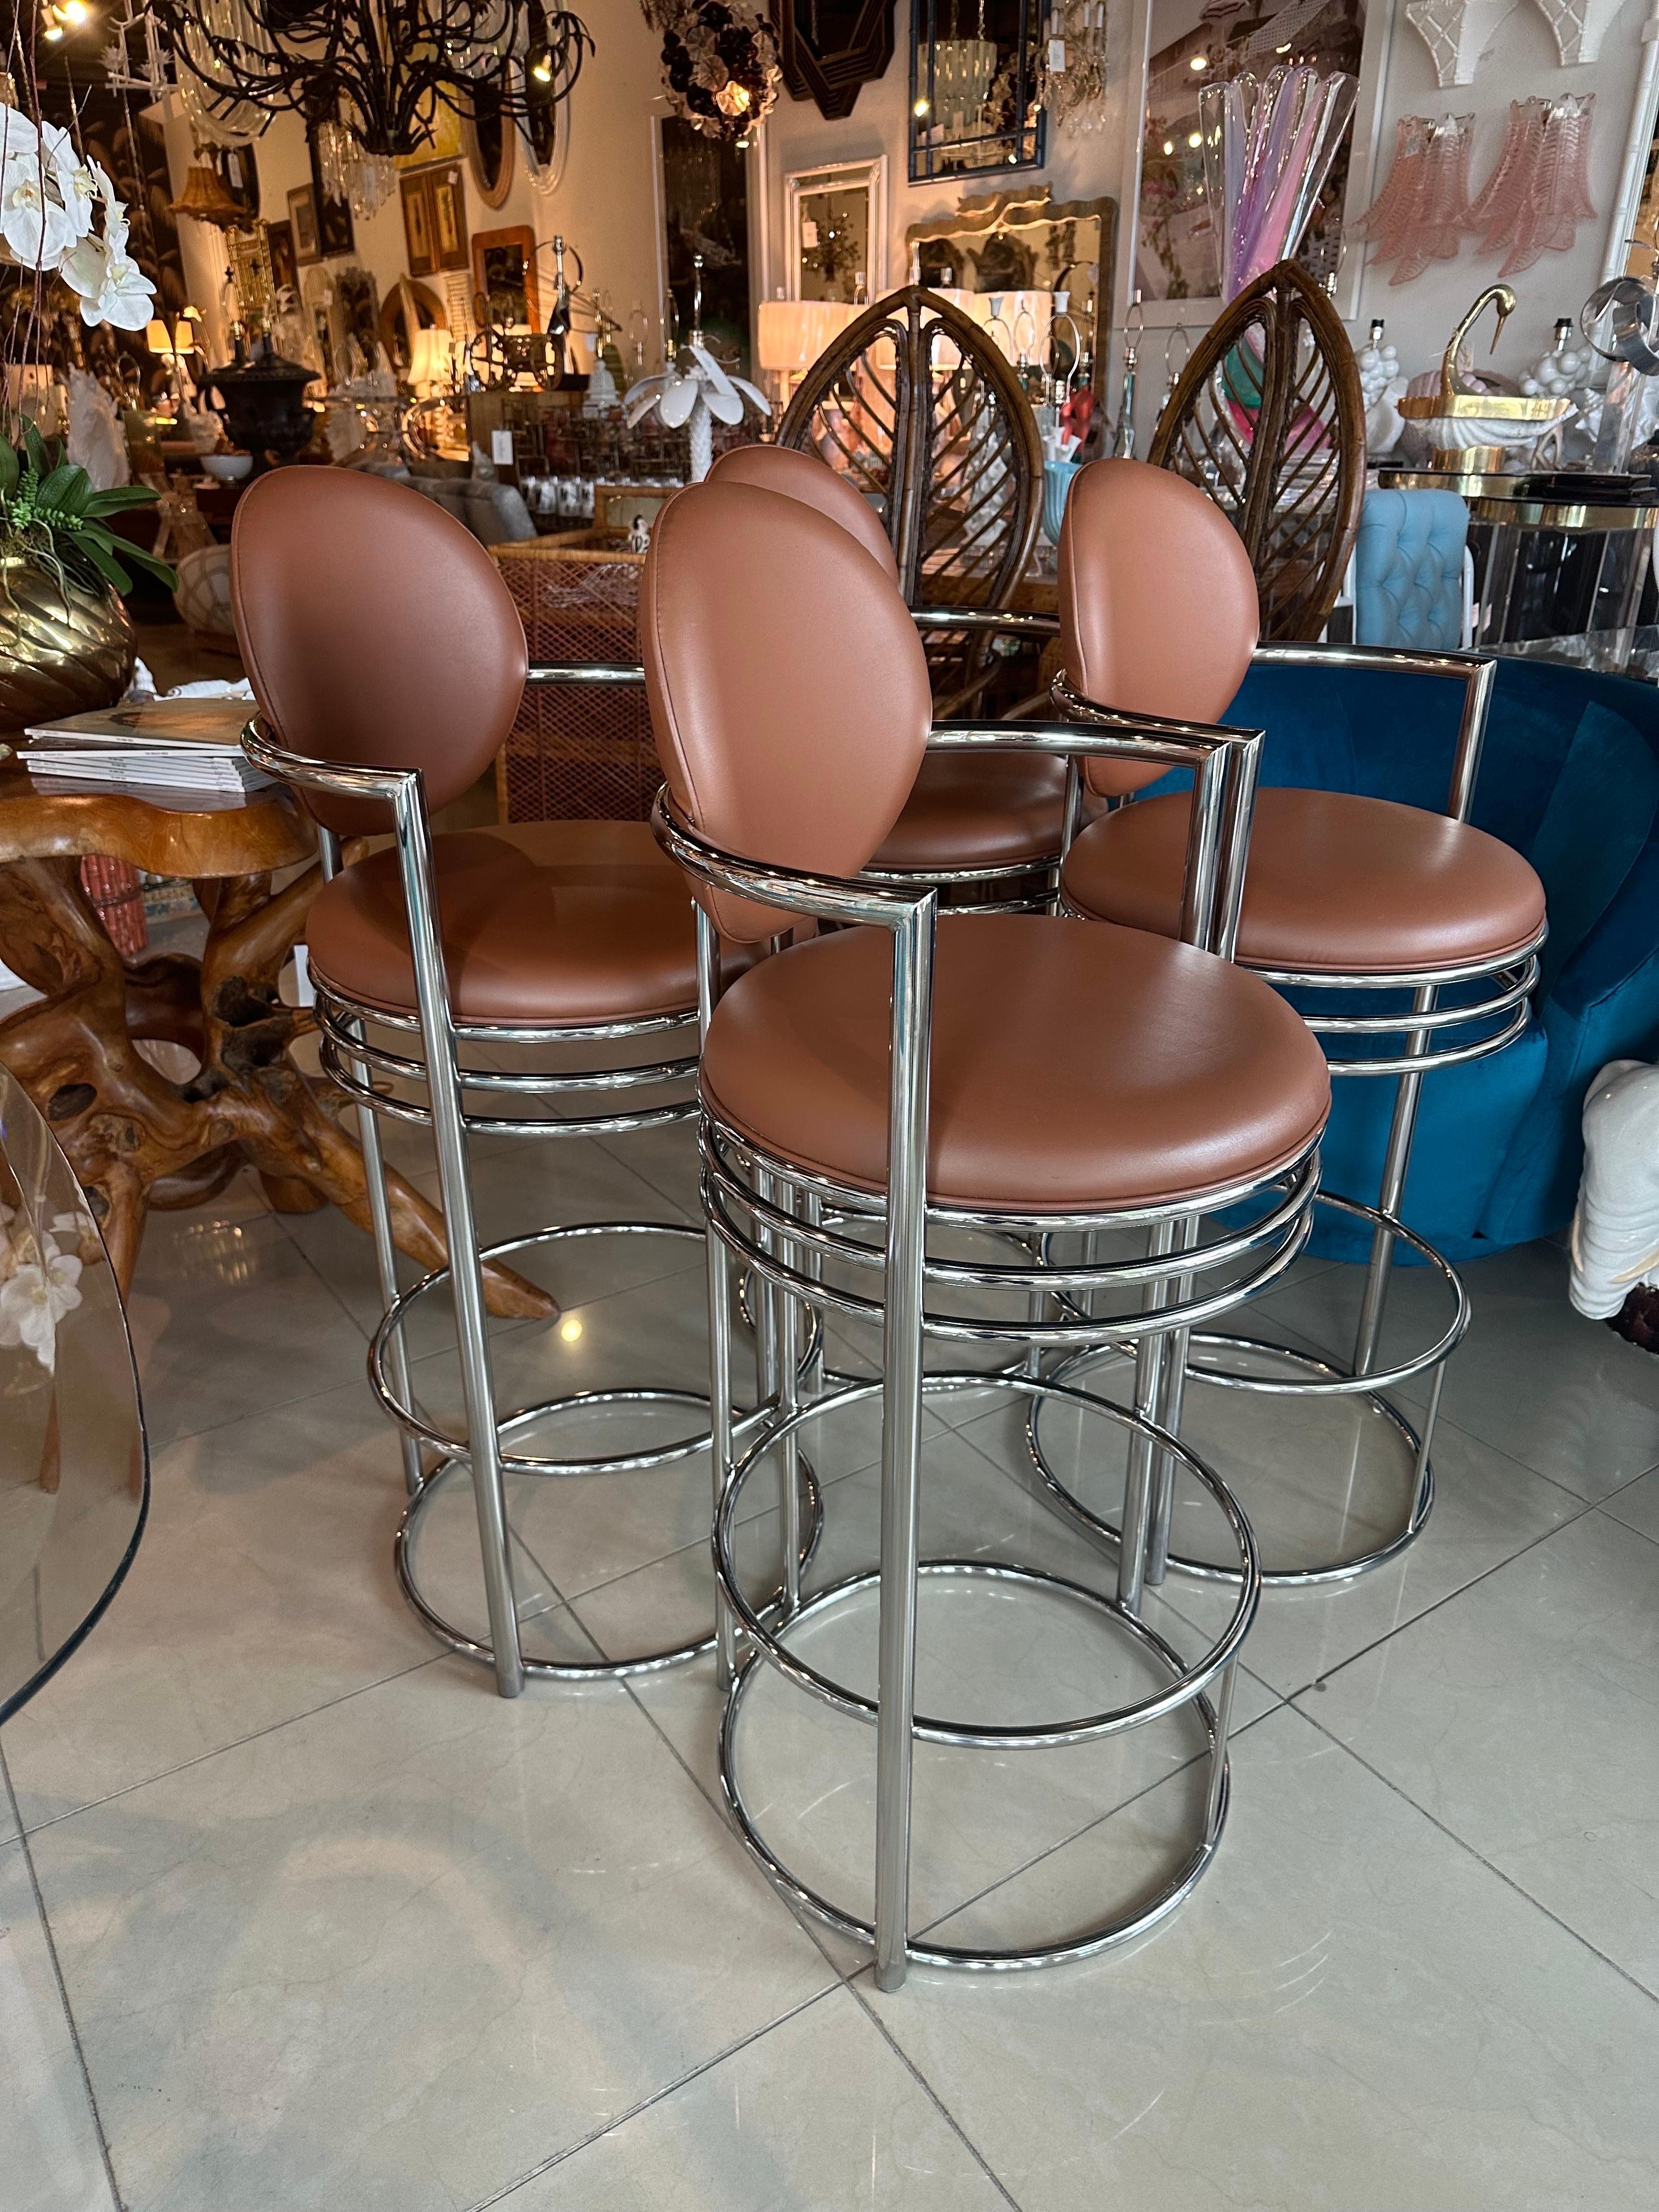 Vintage set of 4 DIA Design Institute of America chrome arm barstools stools, tagged underneath. Chrome has been polished but may have some slight patina. Original vinyl upholstery has a few slight blemishes, impressions. I recommend new upholstery.